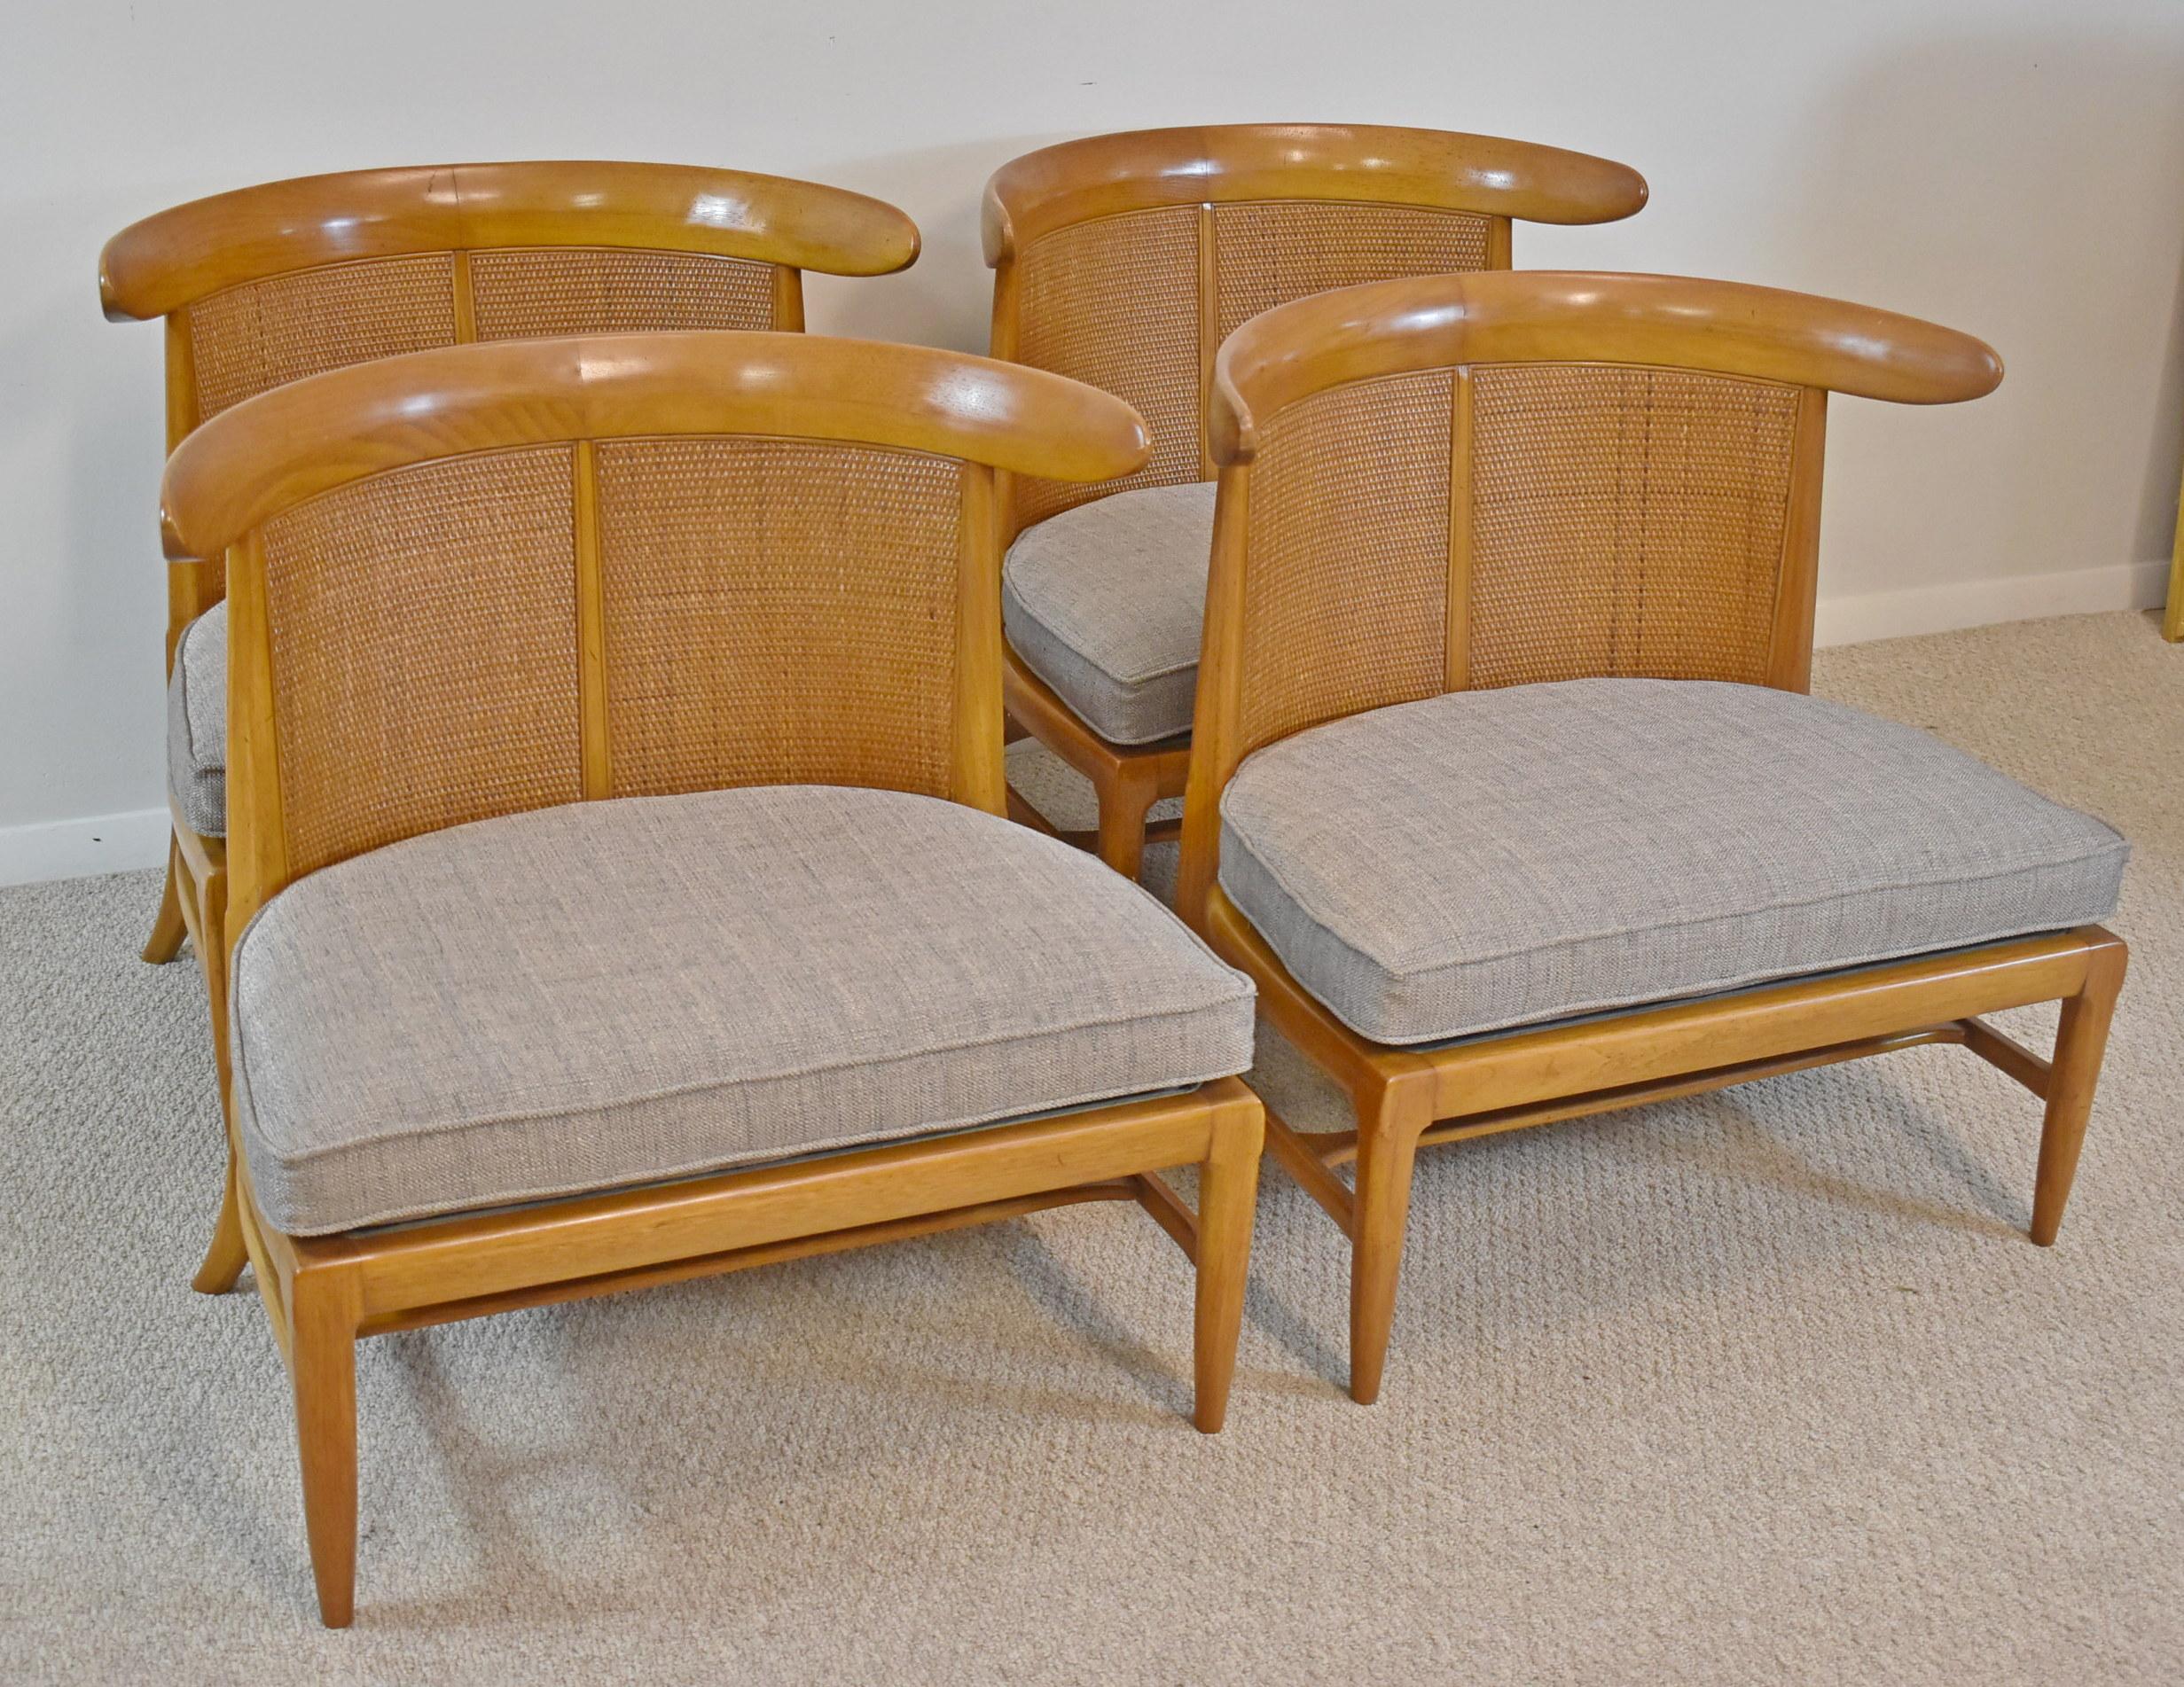 Set of 4 Tomlinson Sophisticate slipper chairs. Elegant chestnut Tomlinson lounge chairs. Caned back with loose seat cushion. Sculptural, wrap around back support. Mid-Century Modern Style. Circa 1950. Good condition. Dimensions: 27